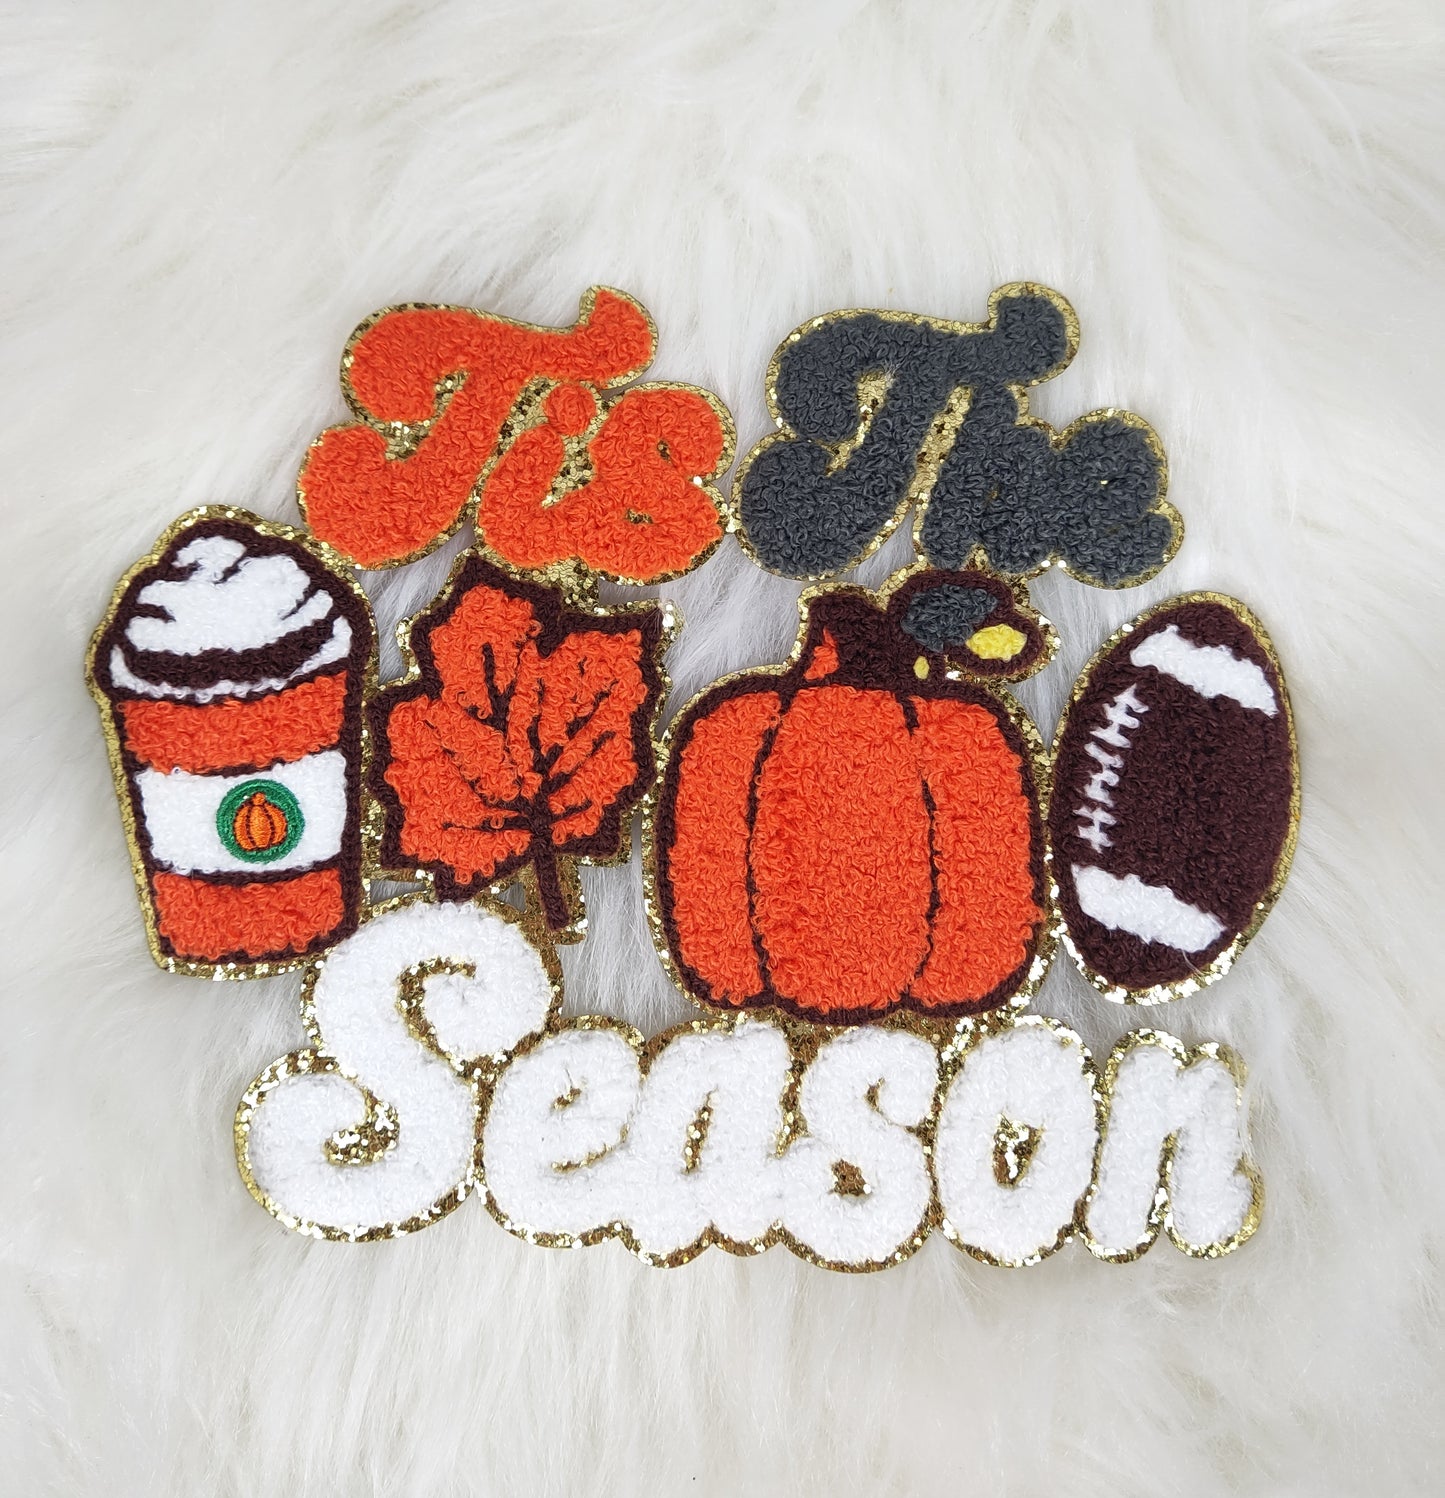  Iron On Patches, Sparkling Patch Iron On, Patches for